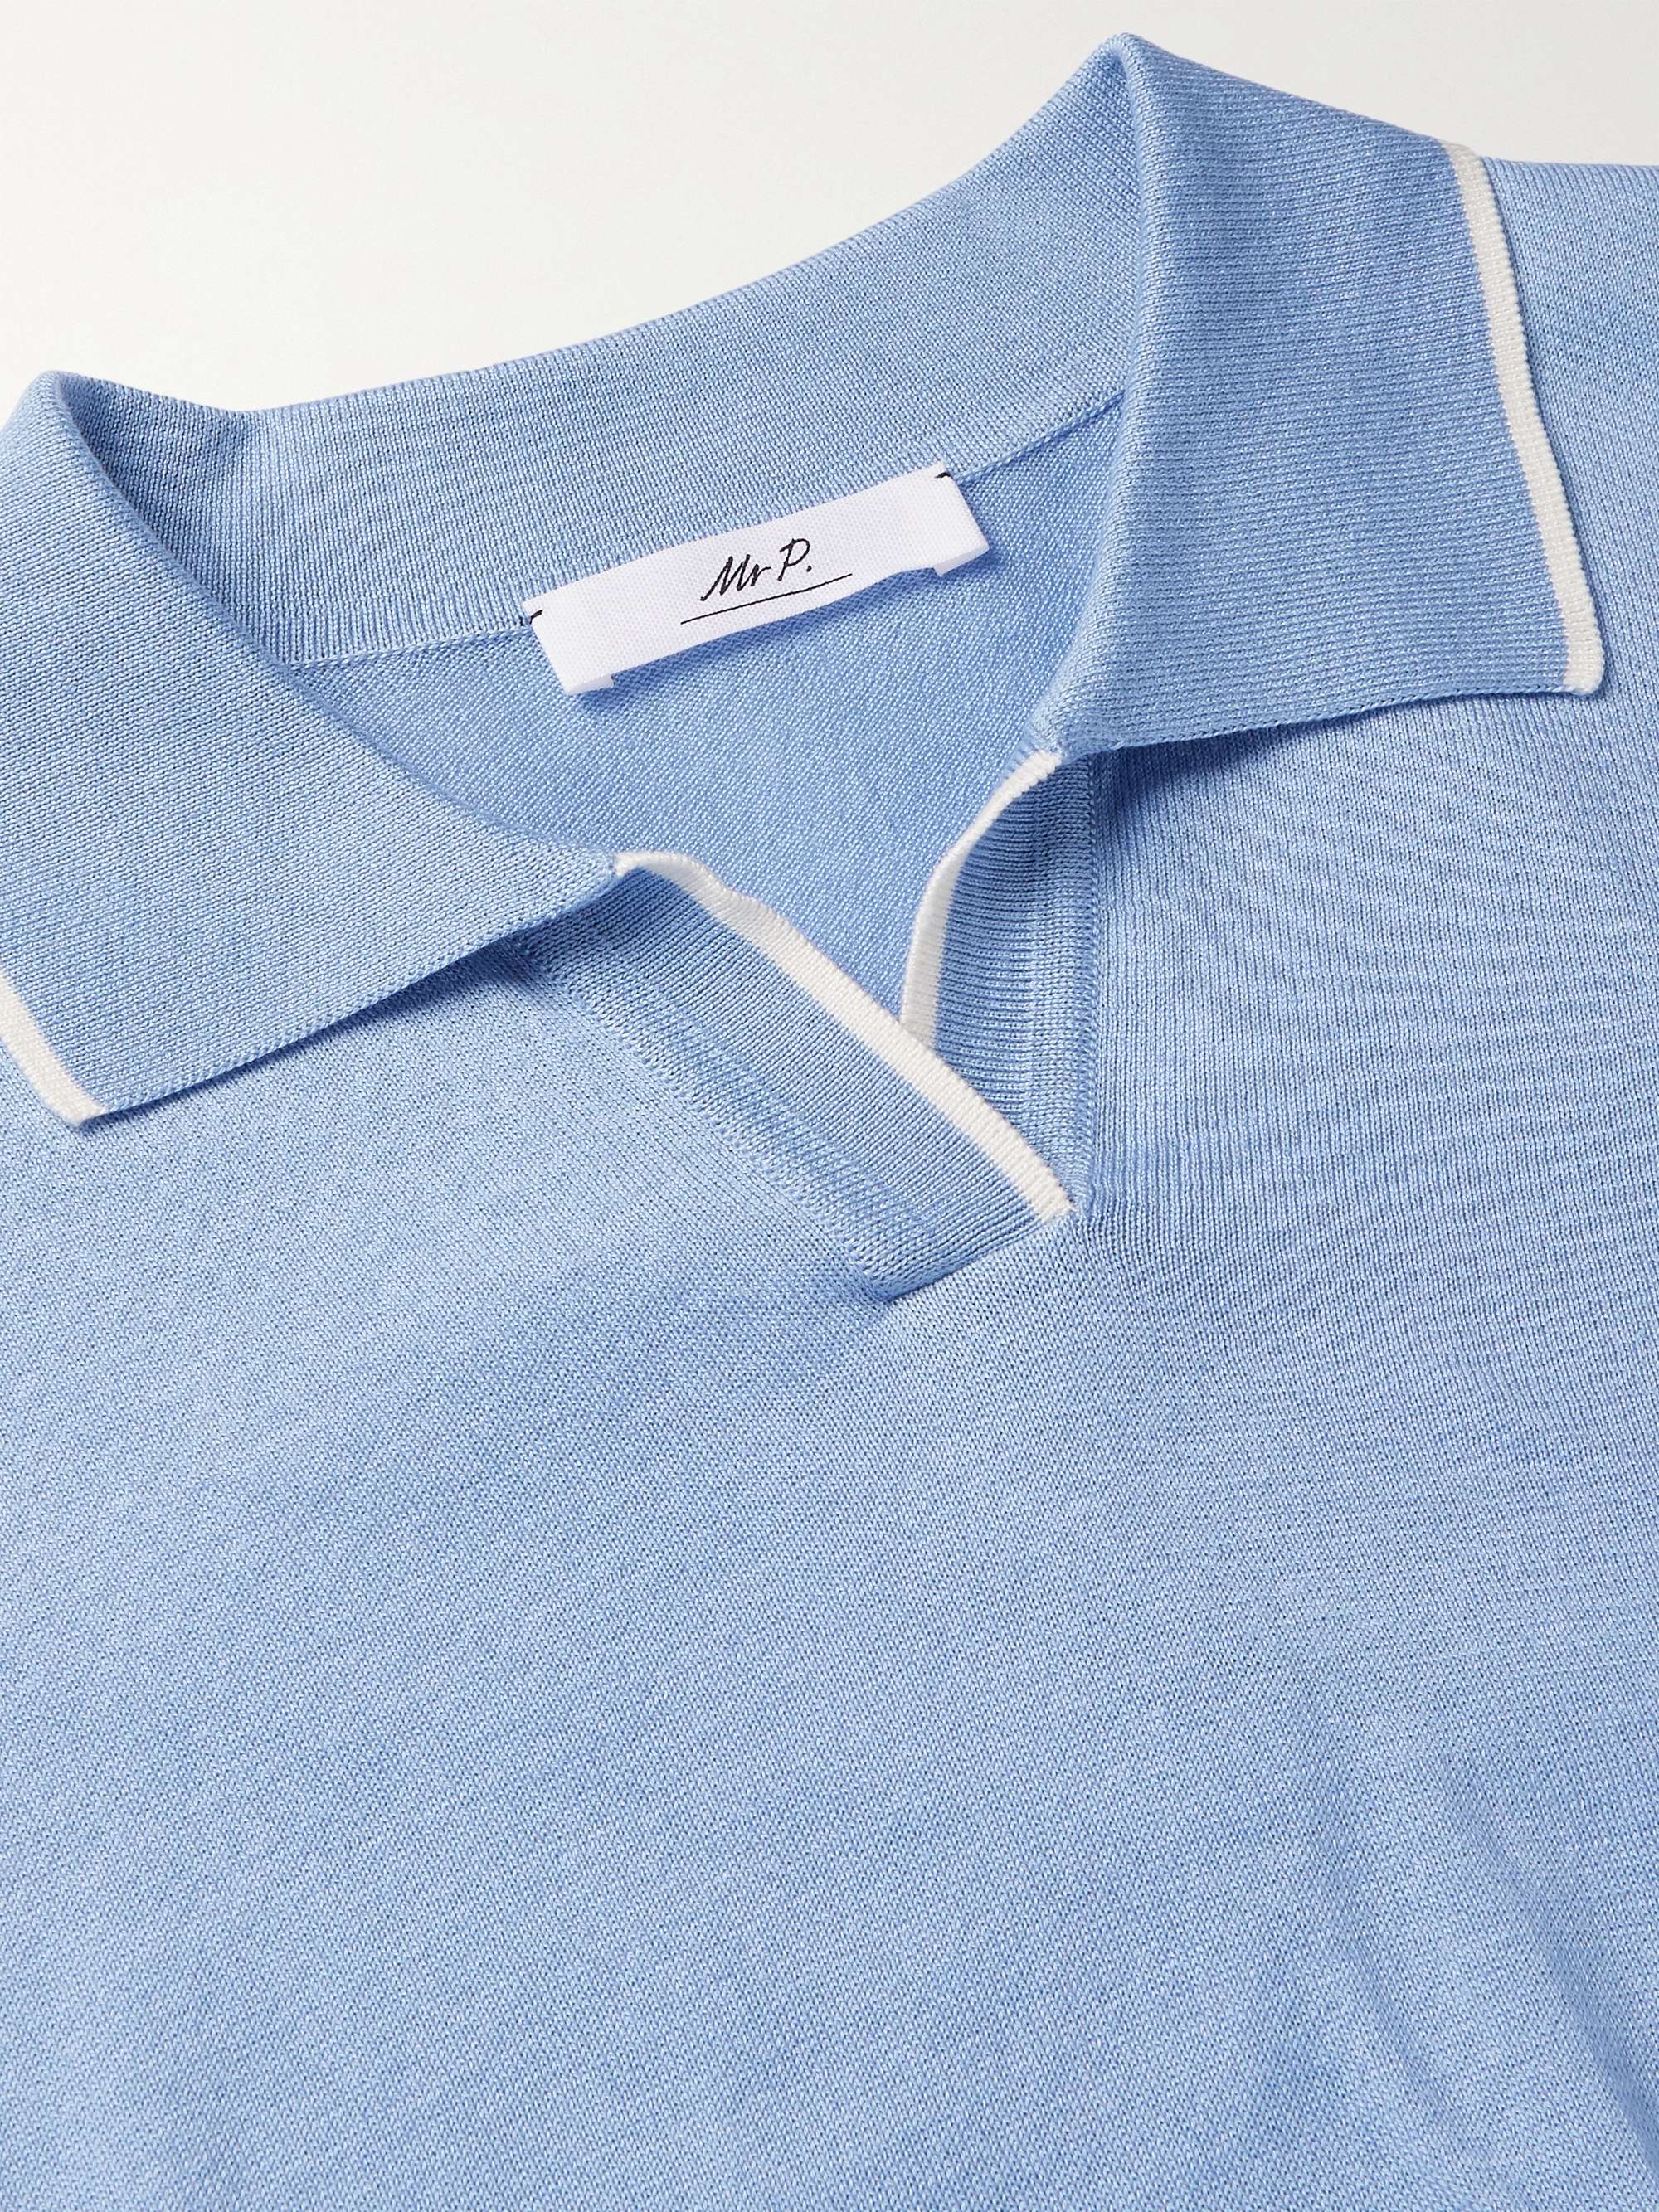 MR P. Contrast-Tipped Cotton Golf Polo Shirt